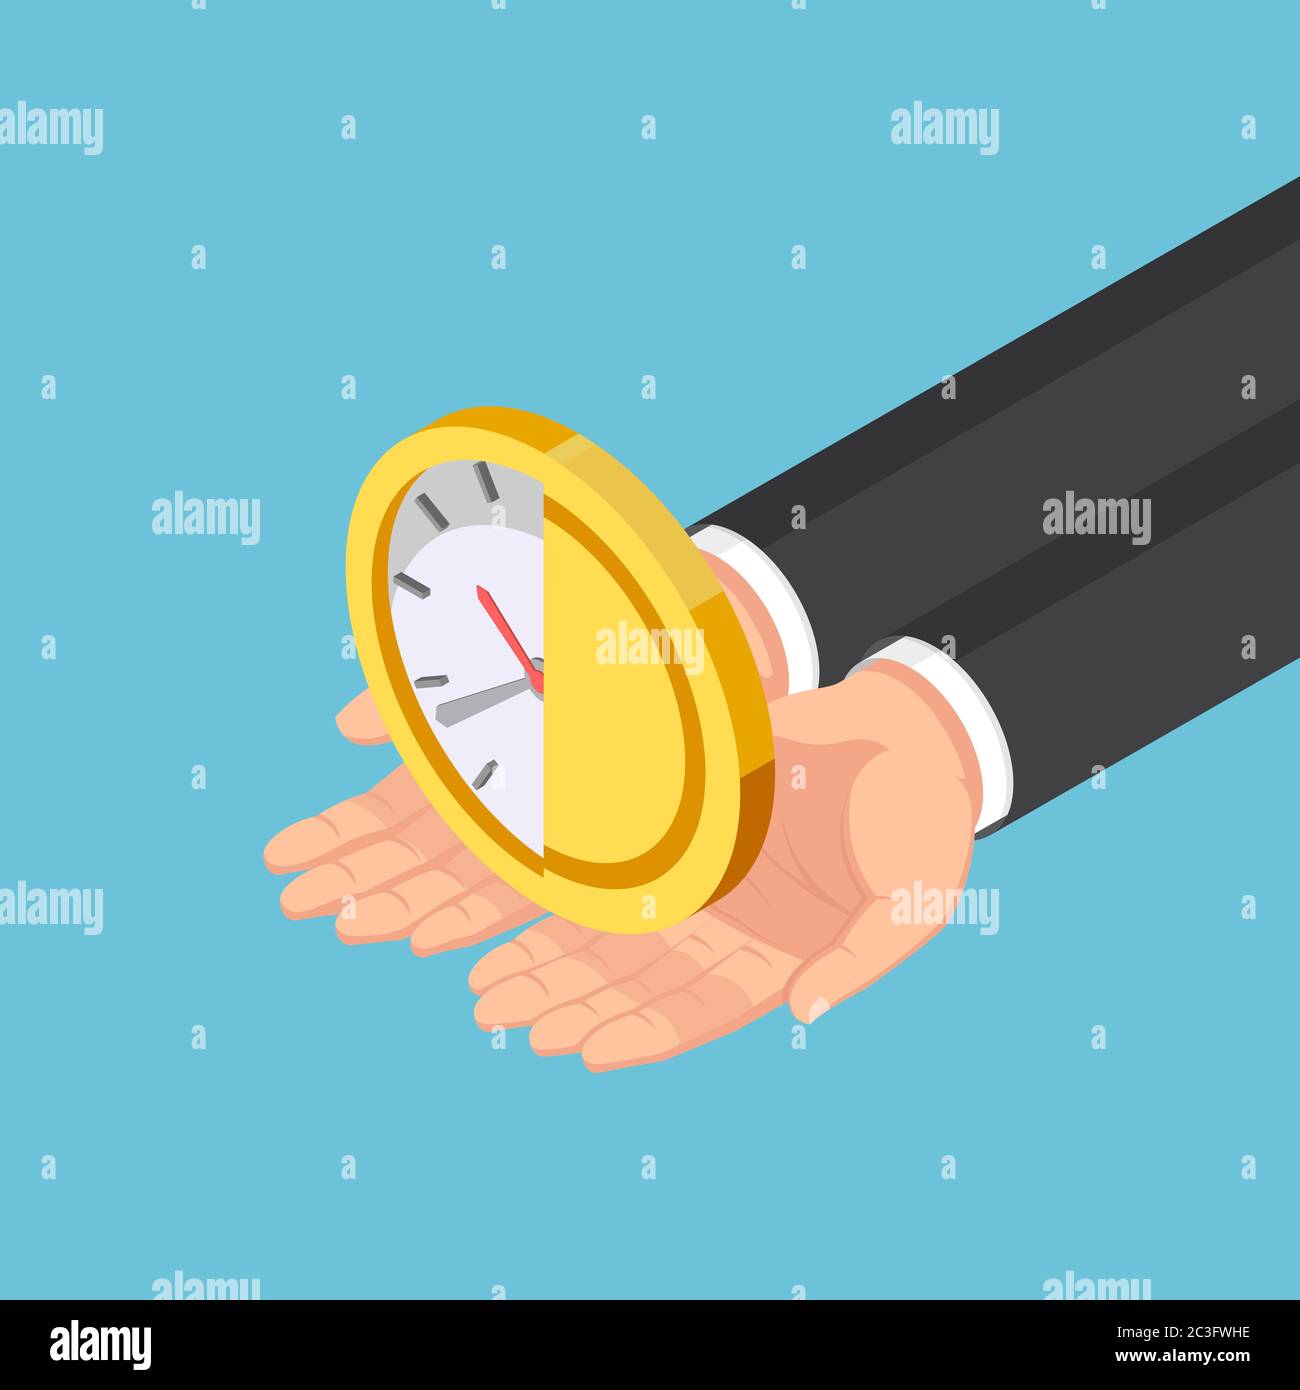 Flat 3d isometric businessman hands holding half of clock and money coin. Time is money concept. Stock Vector